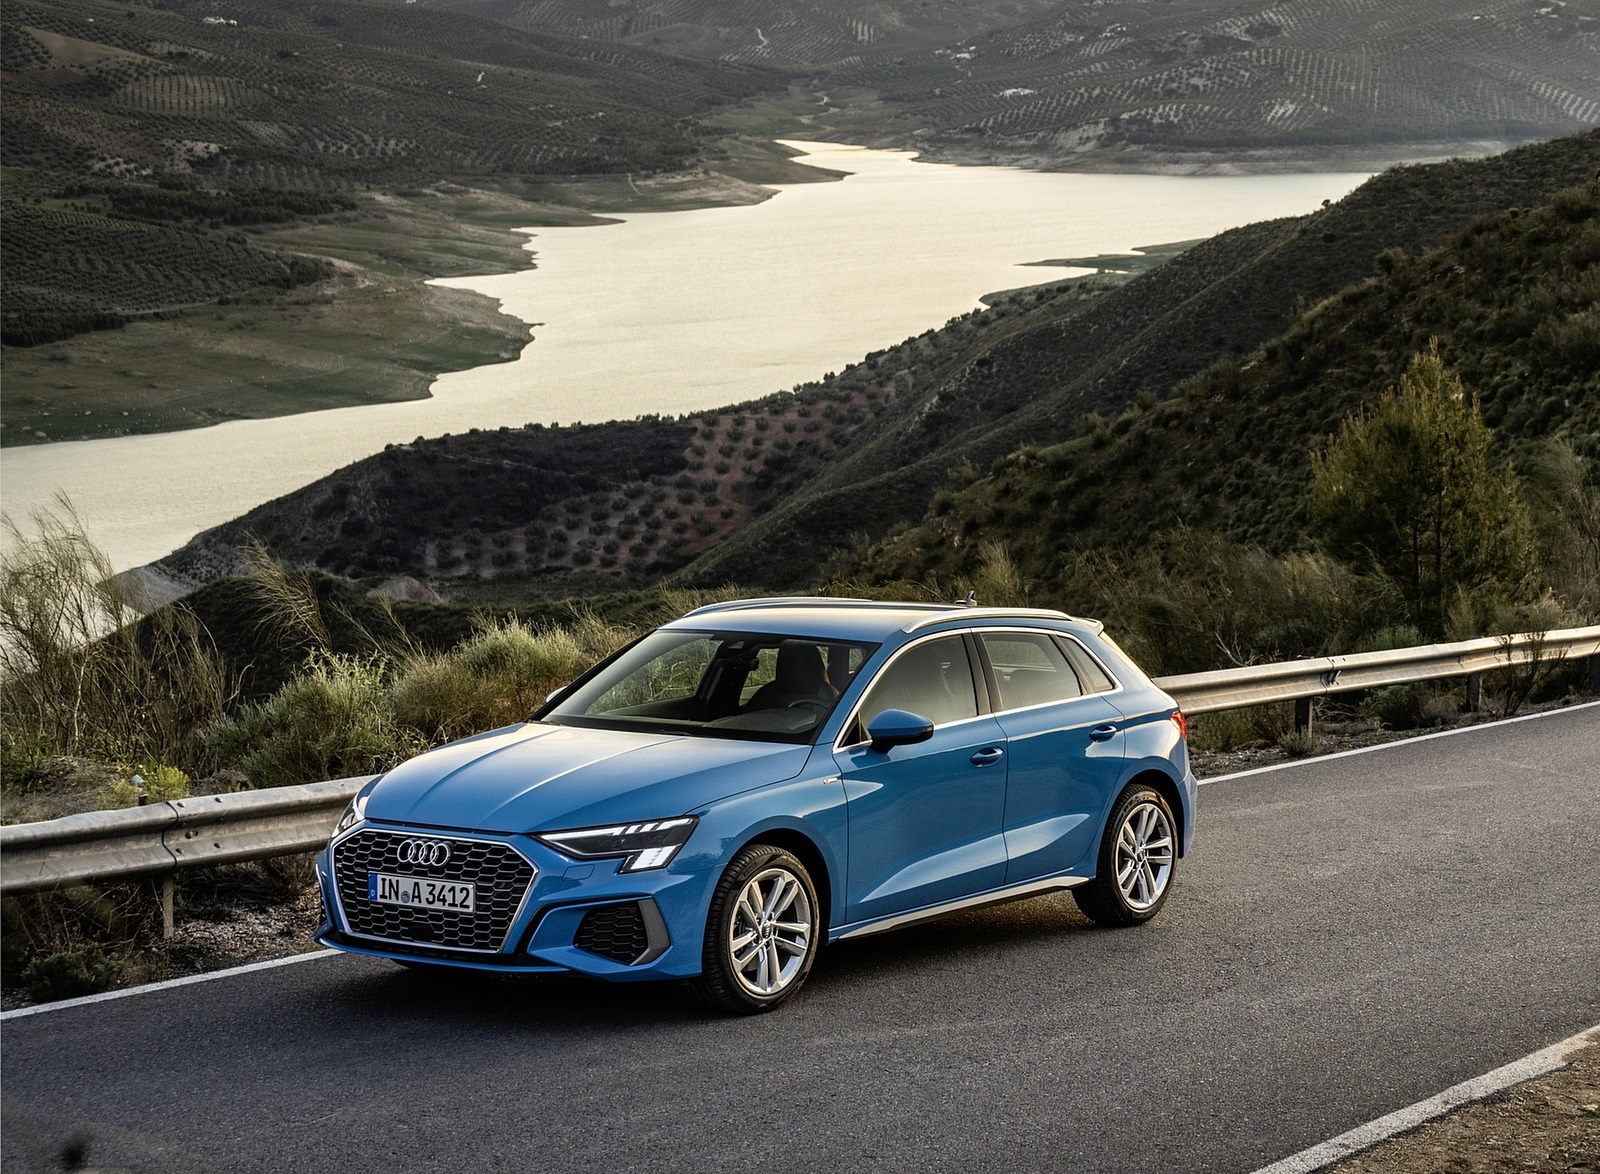 2021 Audi A3 Sportback (Color: Atoll Blue) Front Three-Quarter Wallpapers #54 of 121